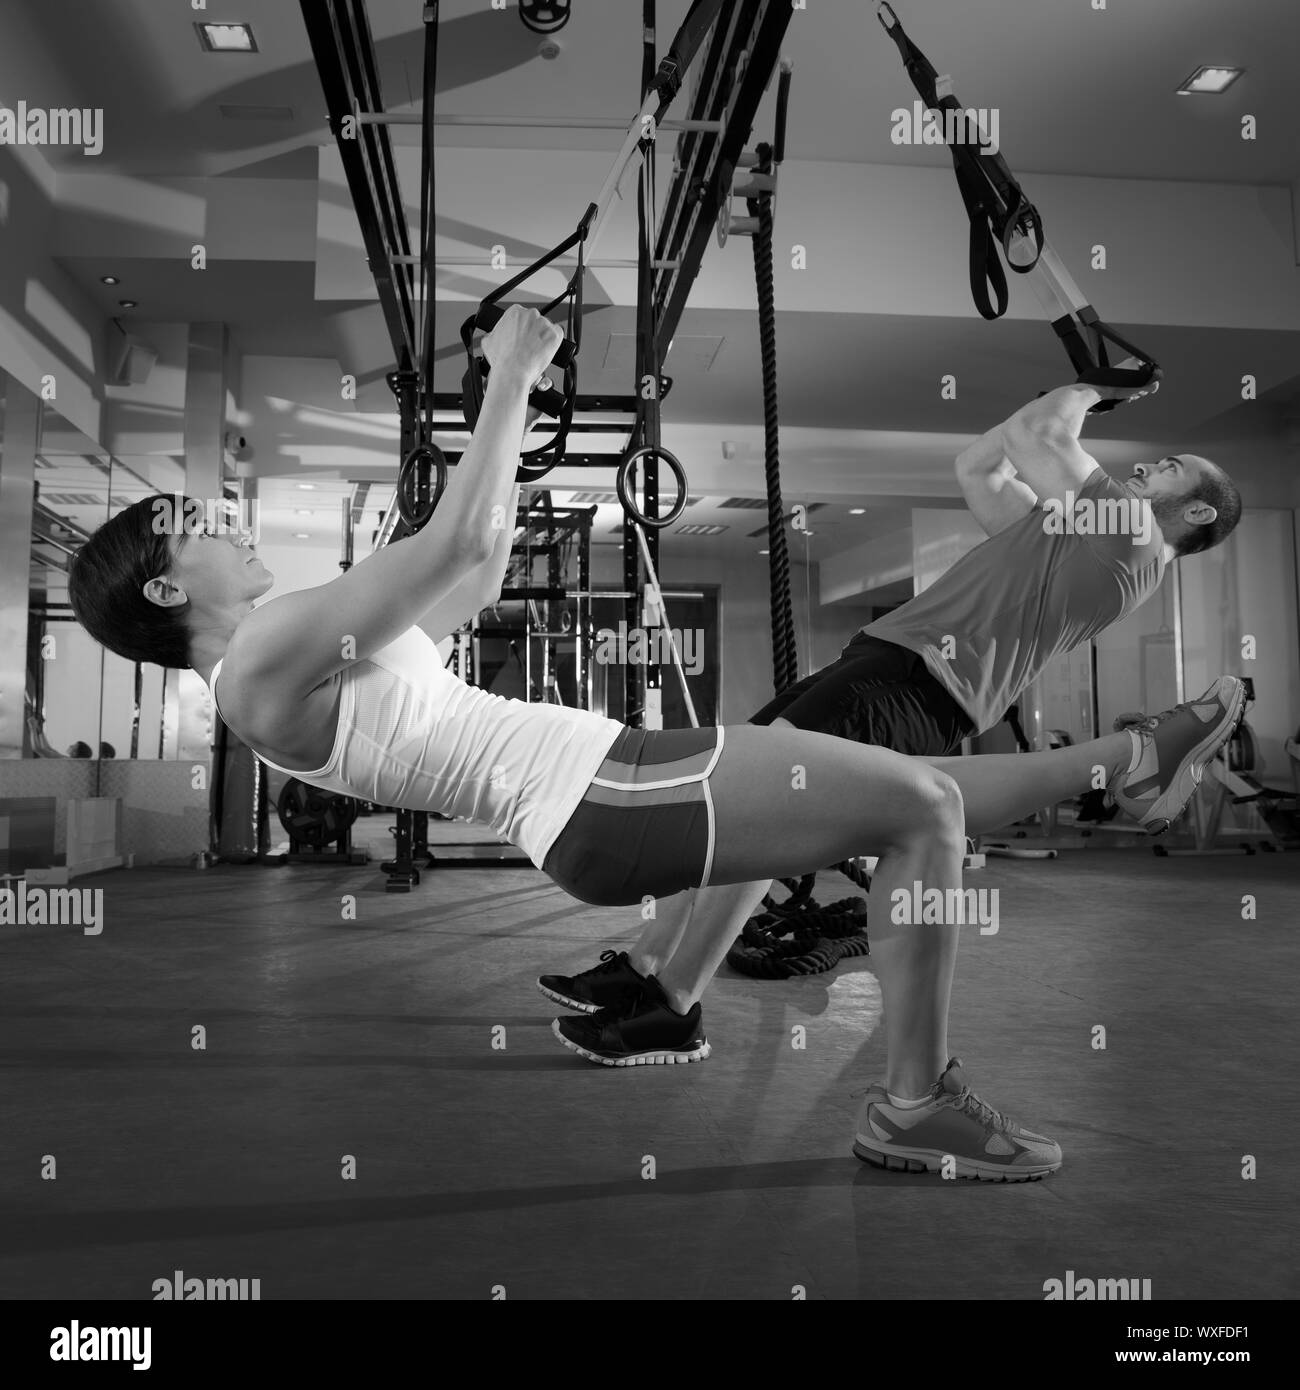 Fitness TRX training exercises at gym woman and man push-up workout Stock Photo